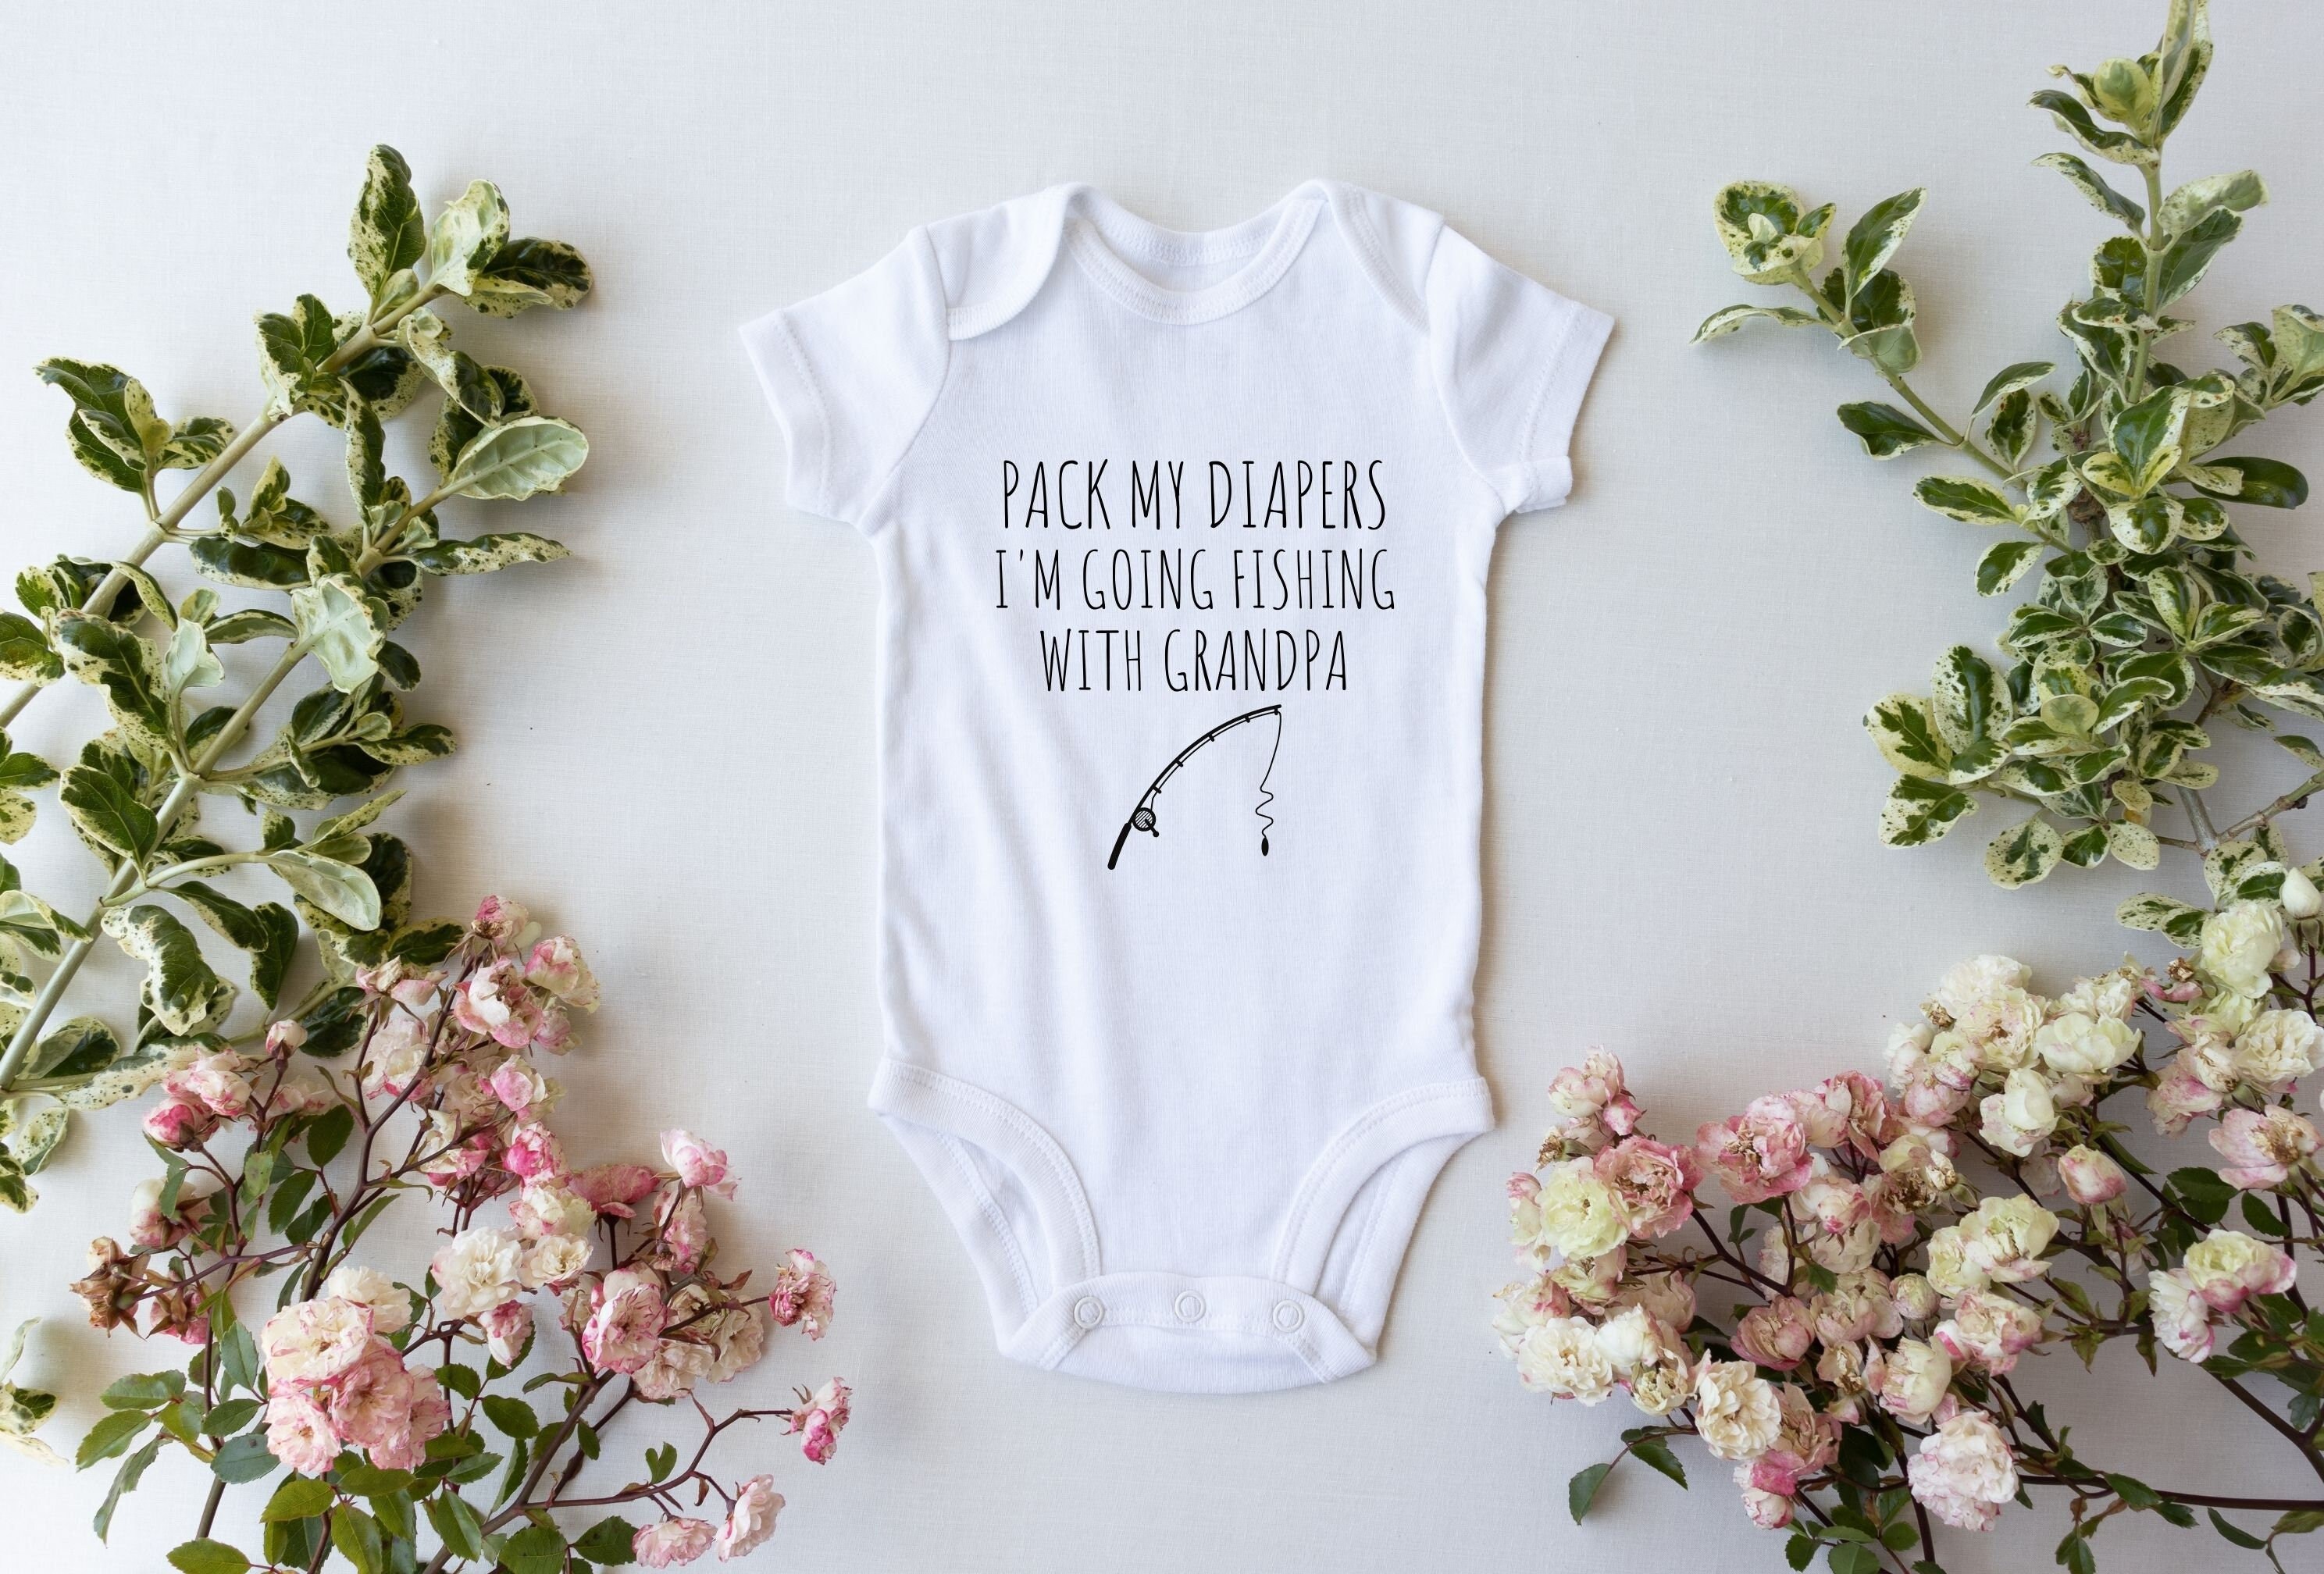 Pack my Diapers Im Going Fishing with Grandpa Pregnancy Announcement Funny Fishing Baby Outfit Baby Bodysuit for Baby Shower Gift